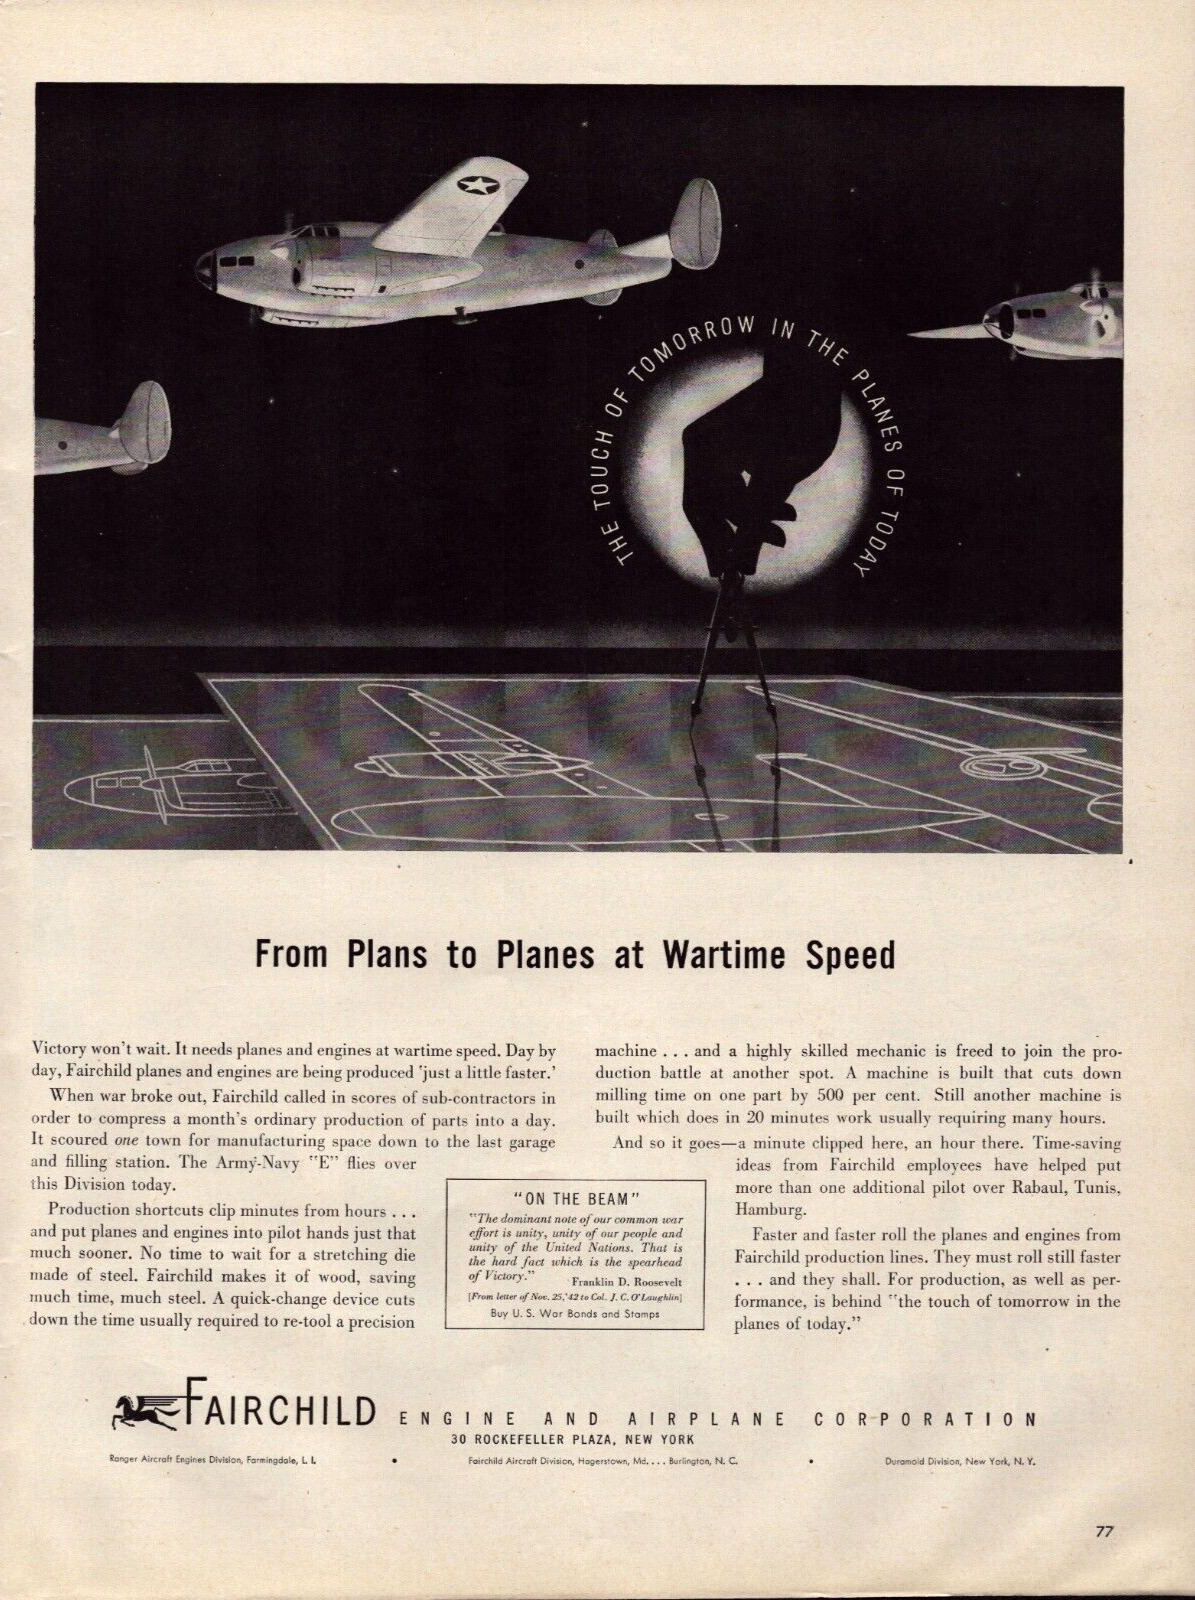 1943 Fairchild Engine & Airplane Print Ad Plans to Planes at Wartime Speed WWII